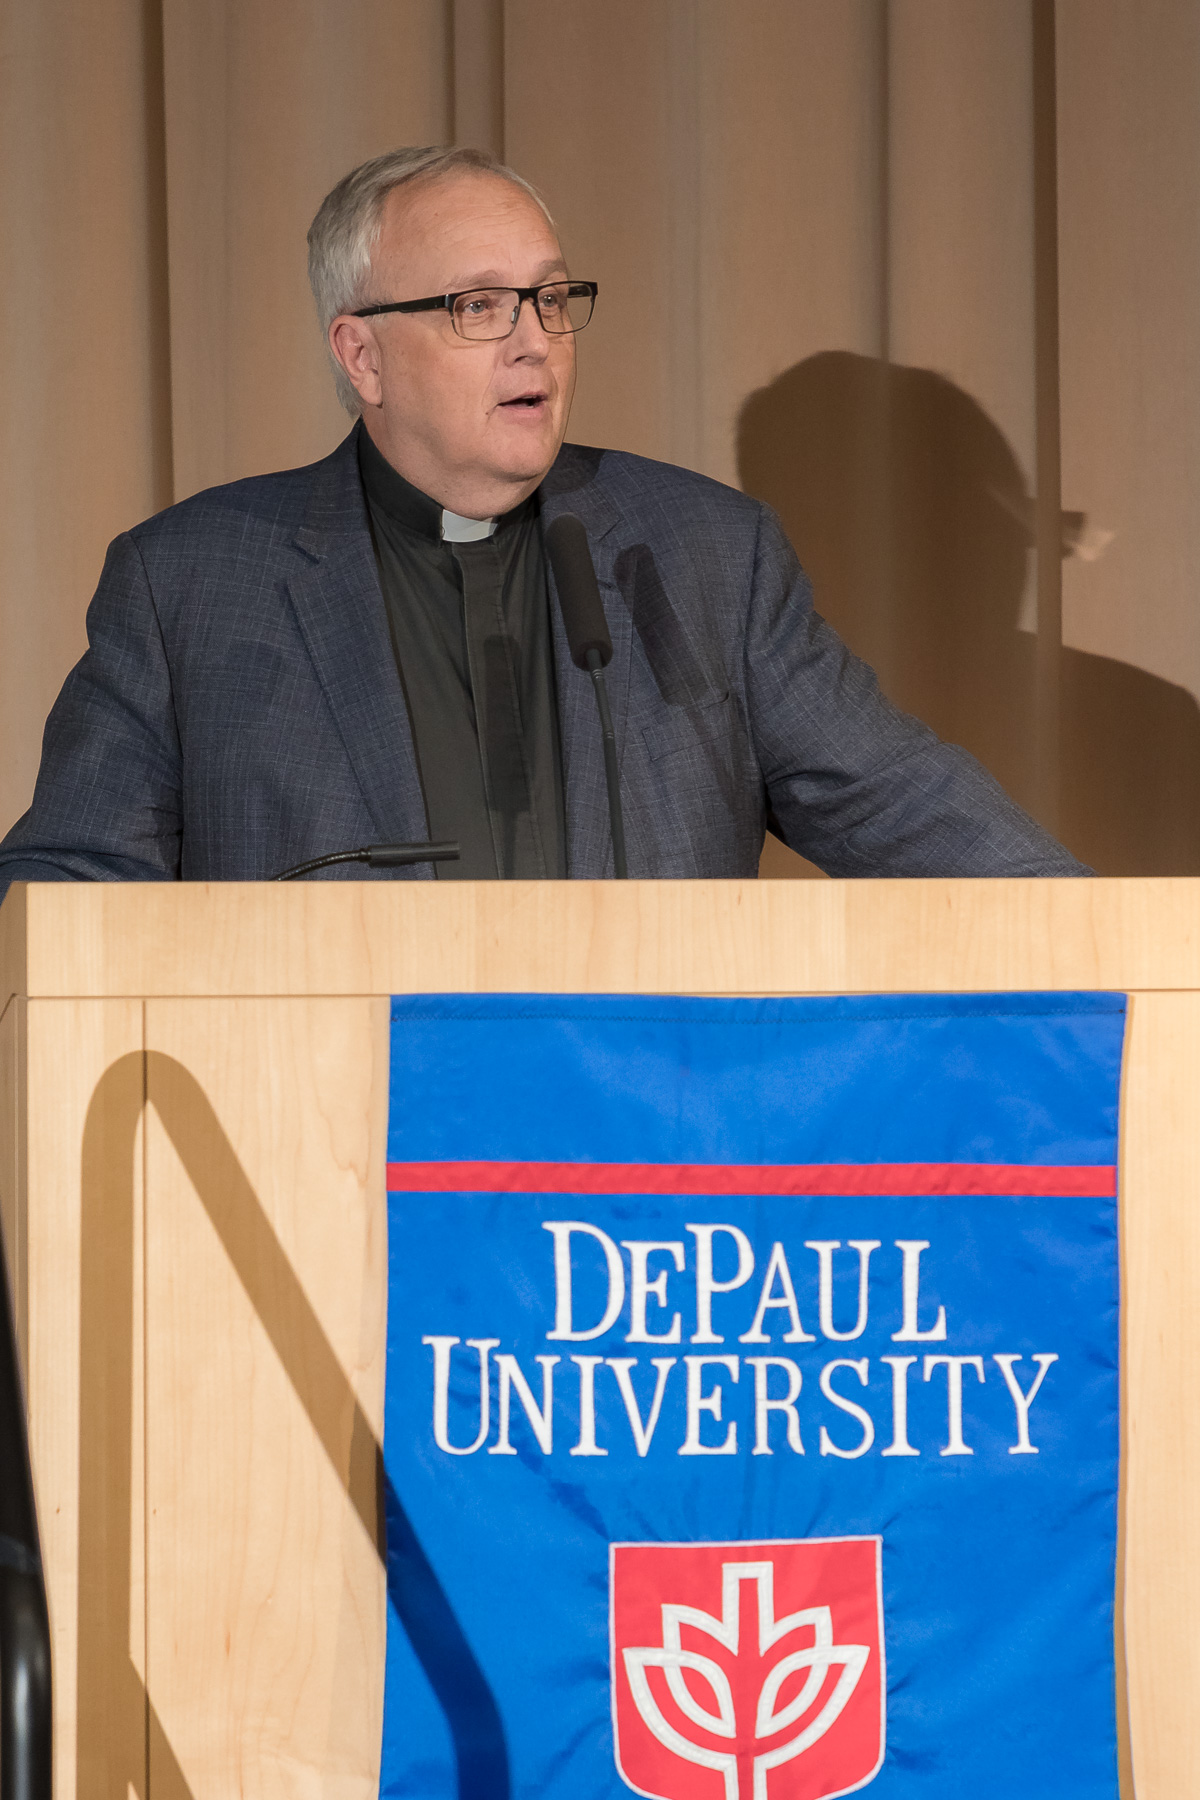 The Rev. Edward R. Udovic, C.M., secretary of the University, offers and invocation as DePaul University faculty and staff members are honored for their 25 years of service during a luncheon, Tuesday, Nov. 13, 2018, at the Lincoln Park Student Center. The honorees were recognized by A. Gabriel Esteban, Ph.D., president of DePaul, and will have their names added to plaques located on the Loop and Lincoln Park Campuses. (DePaul University/Jeff Carrion)